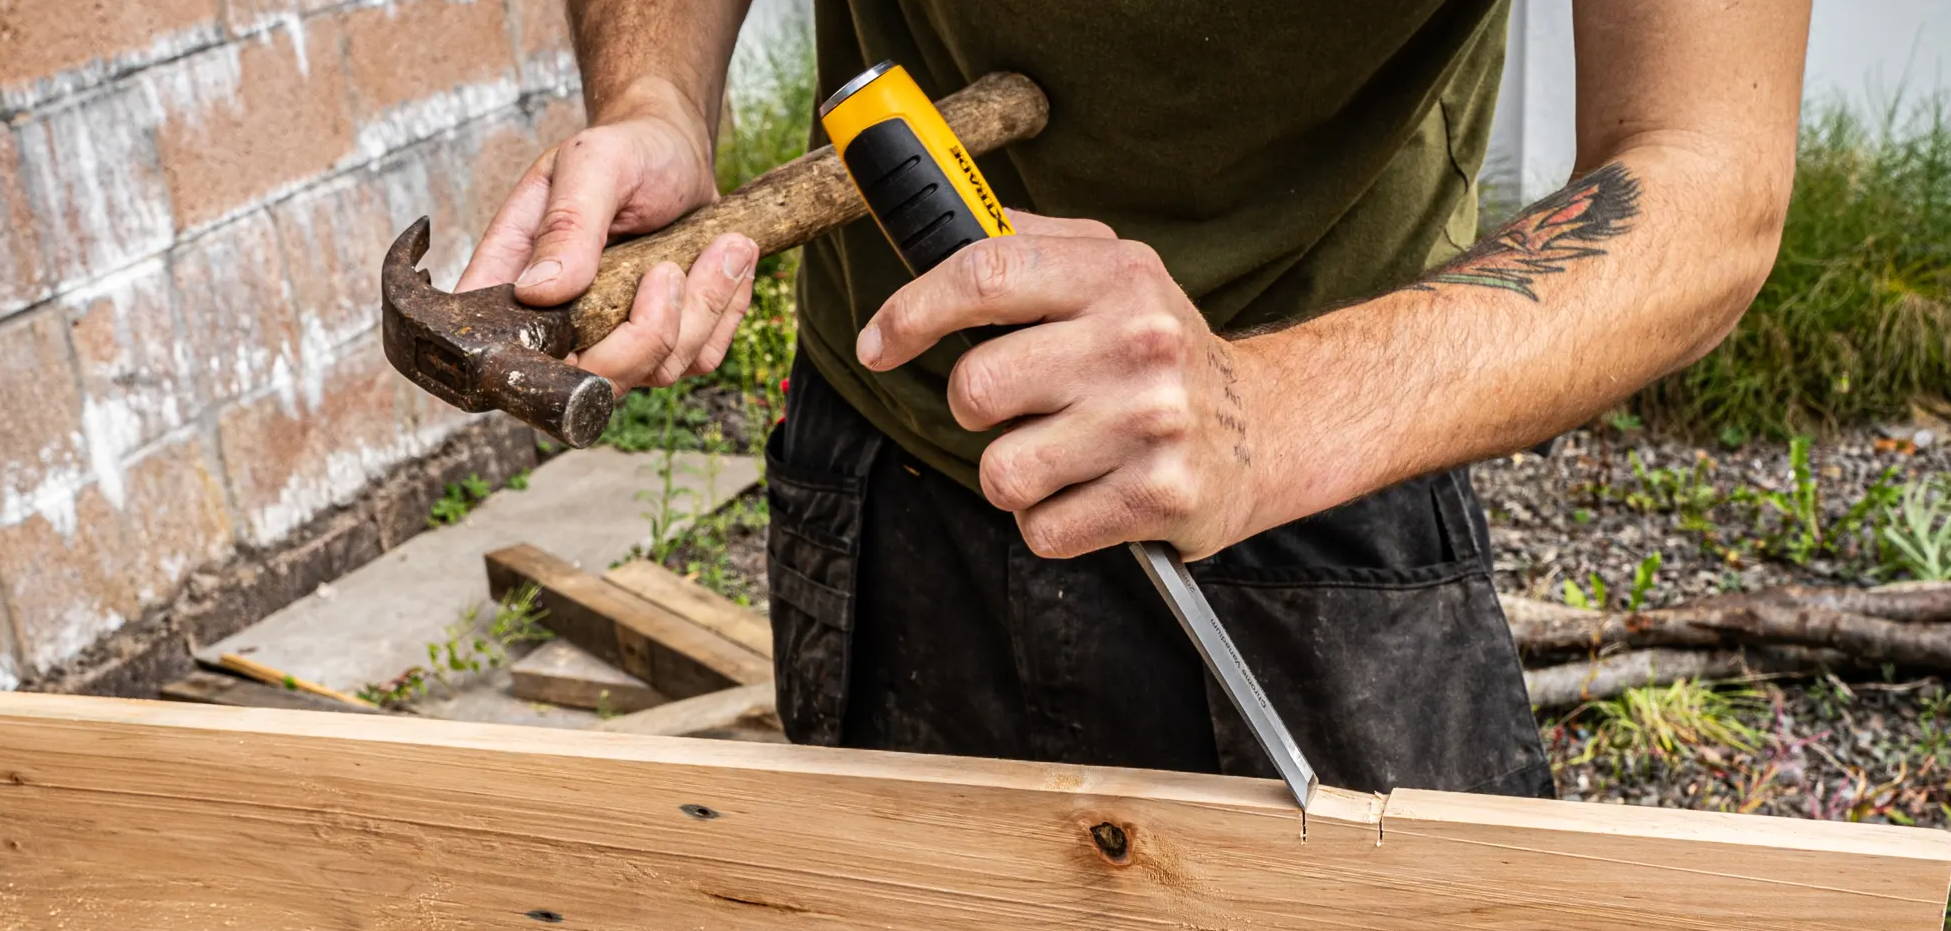 How to sharpen wood chisels